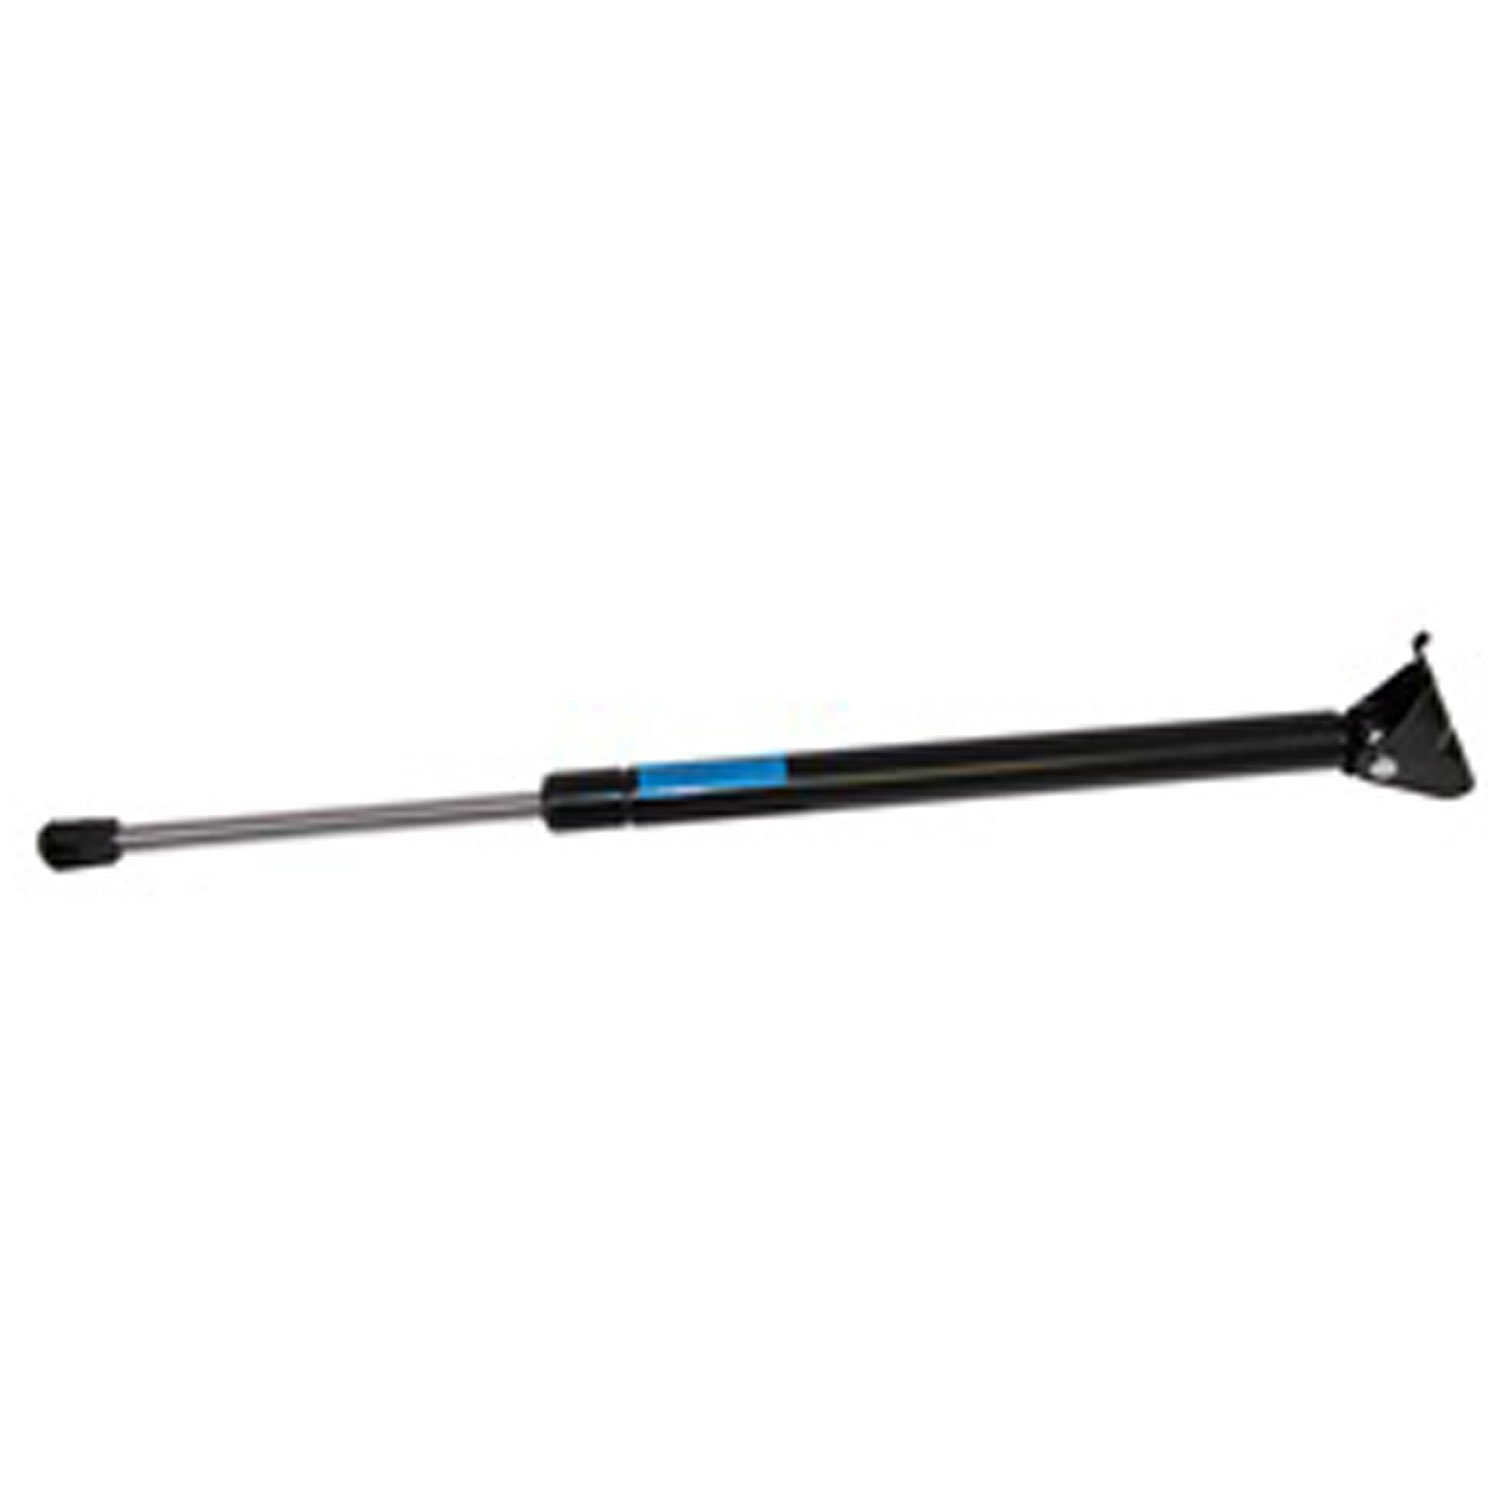 Replacement gas strut from Omix-ADA, Fits liftgate on 93-98 Jeep Grand Cherokee ZJ Left side.